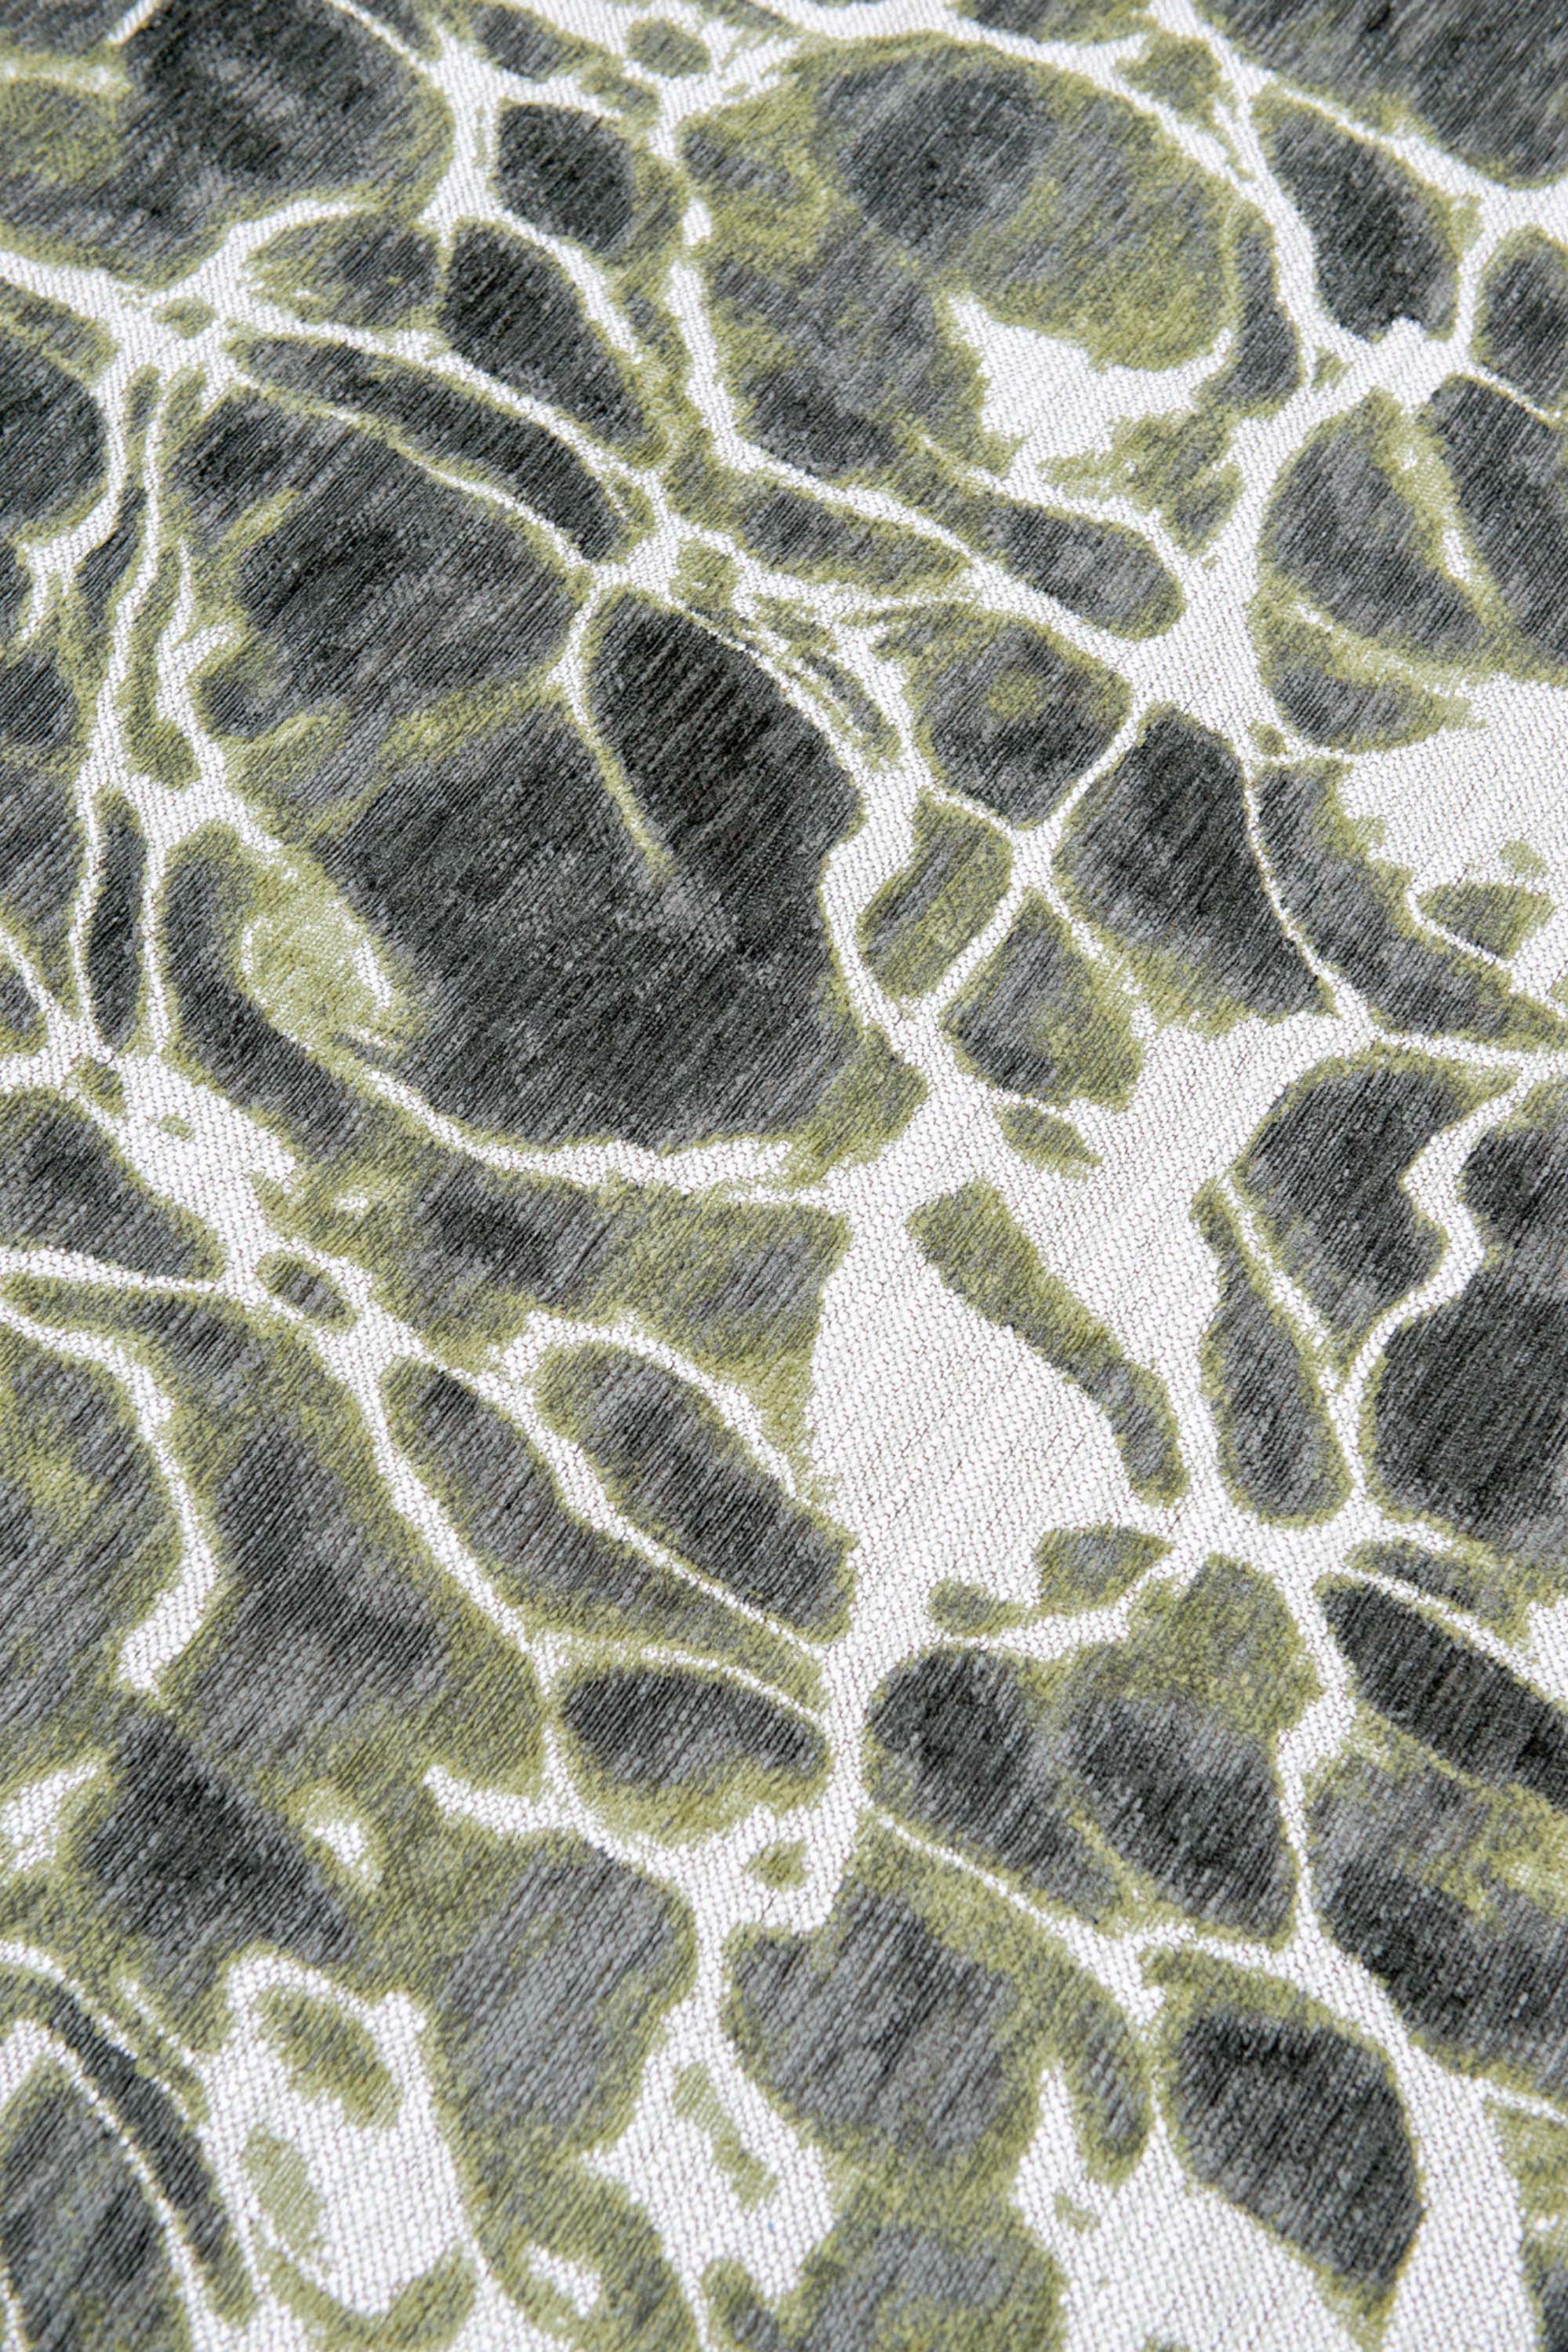 Modern runner rug with green abstract water inspired pattern